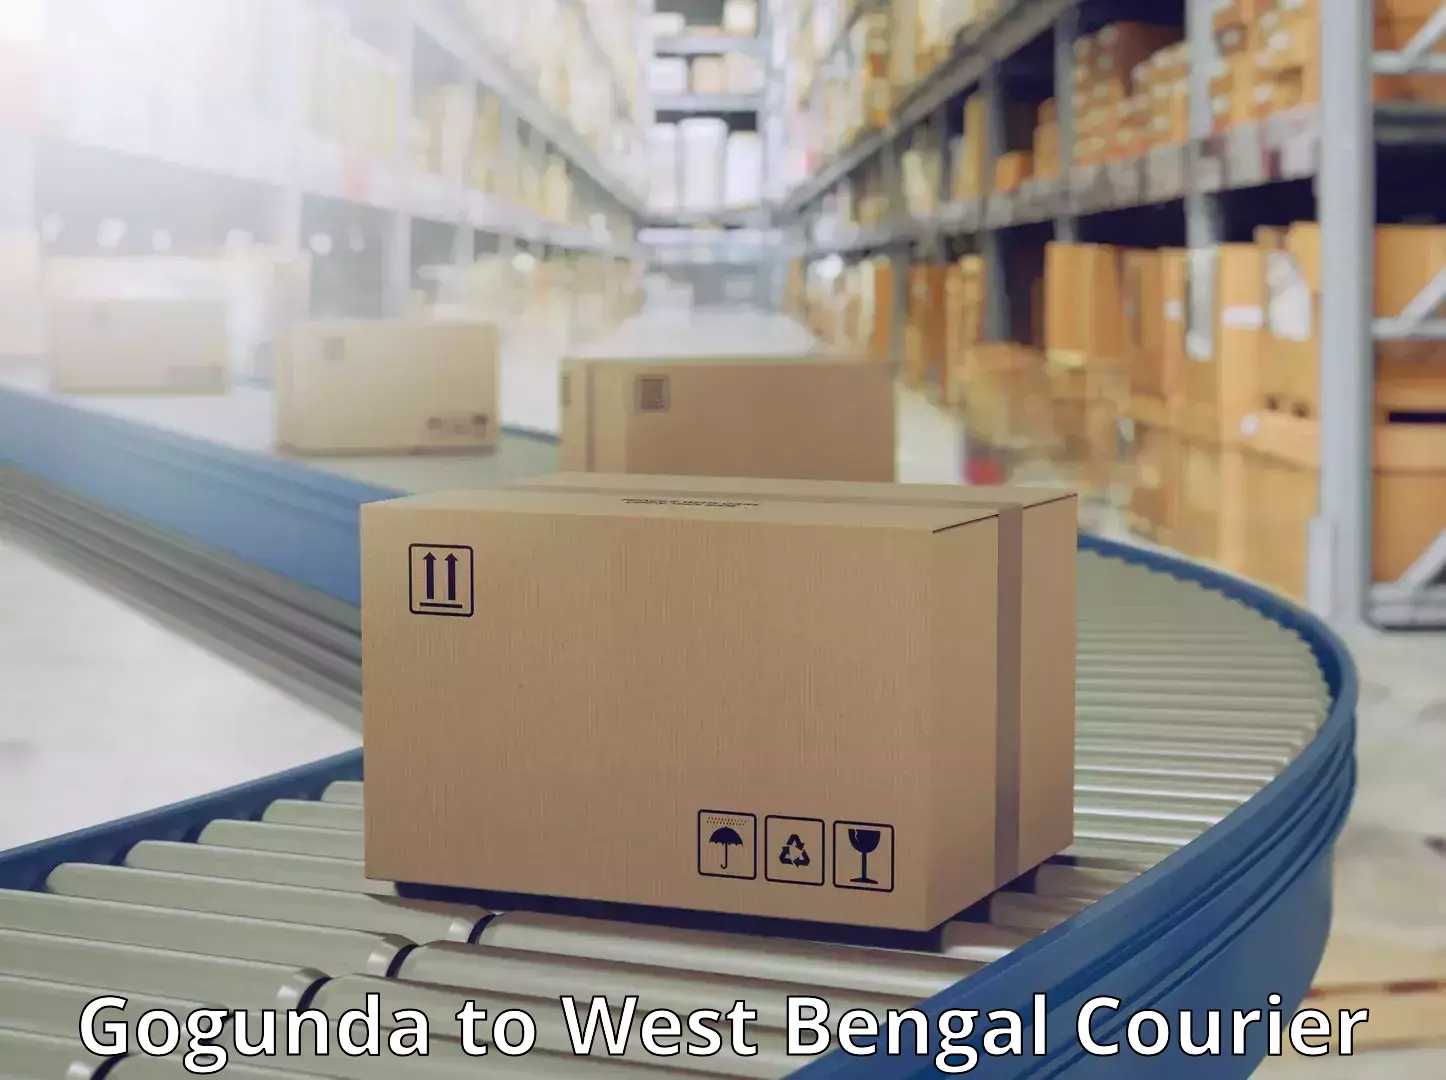 Express package transport Gogunda to West Bengal